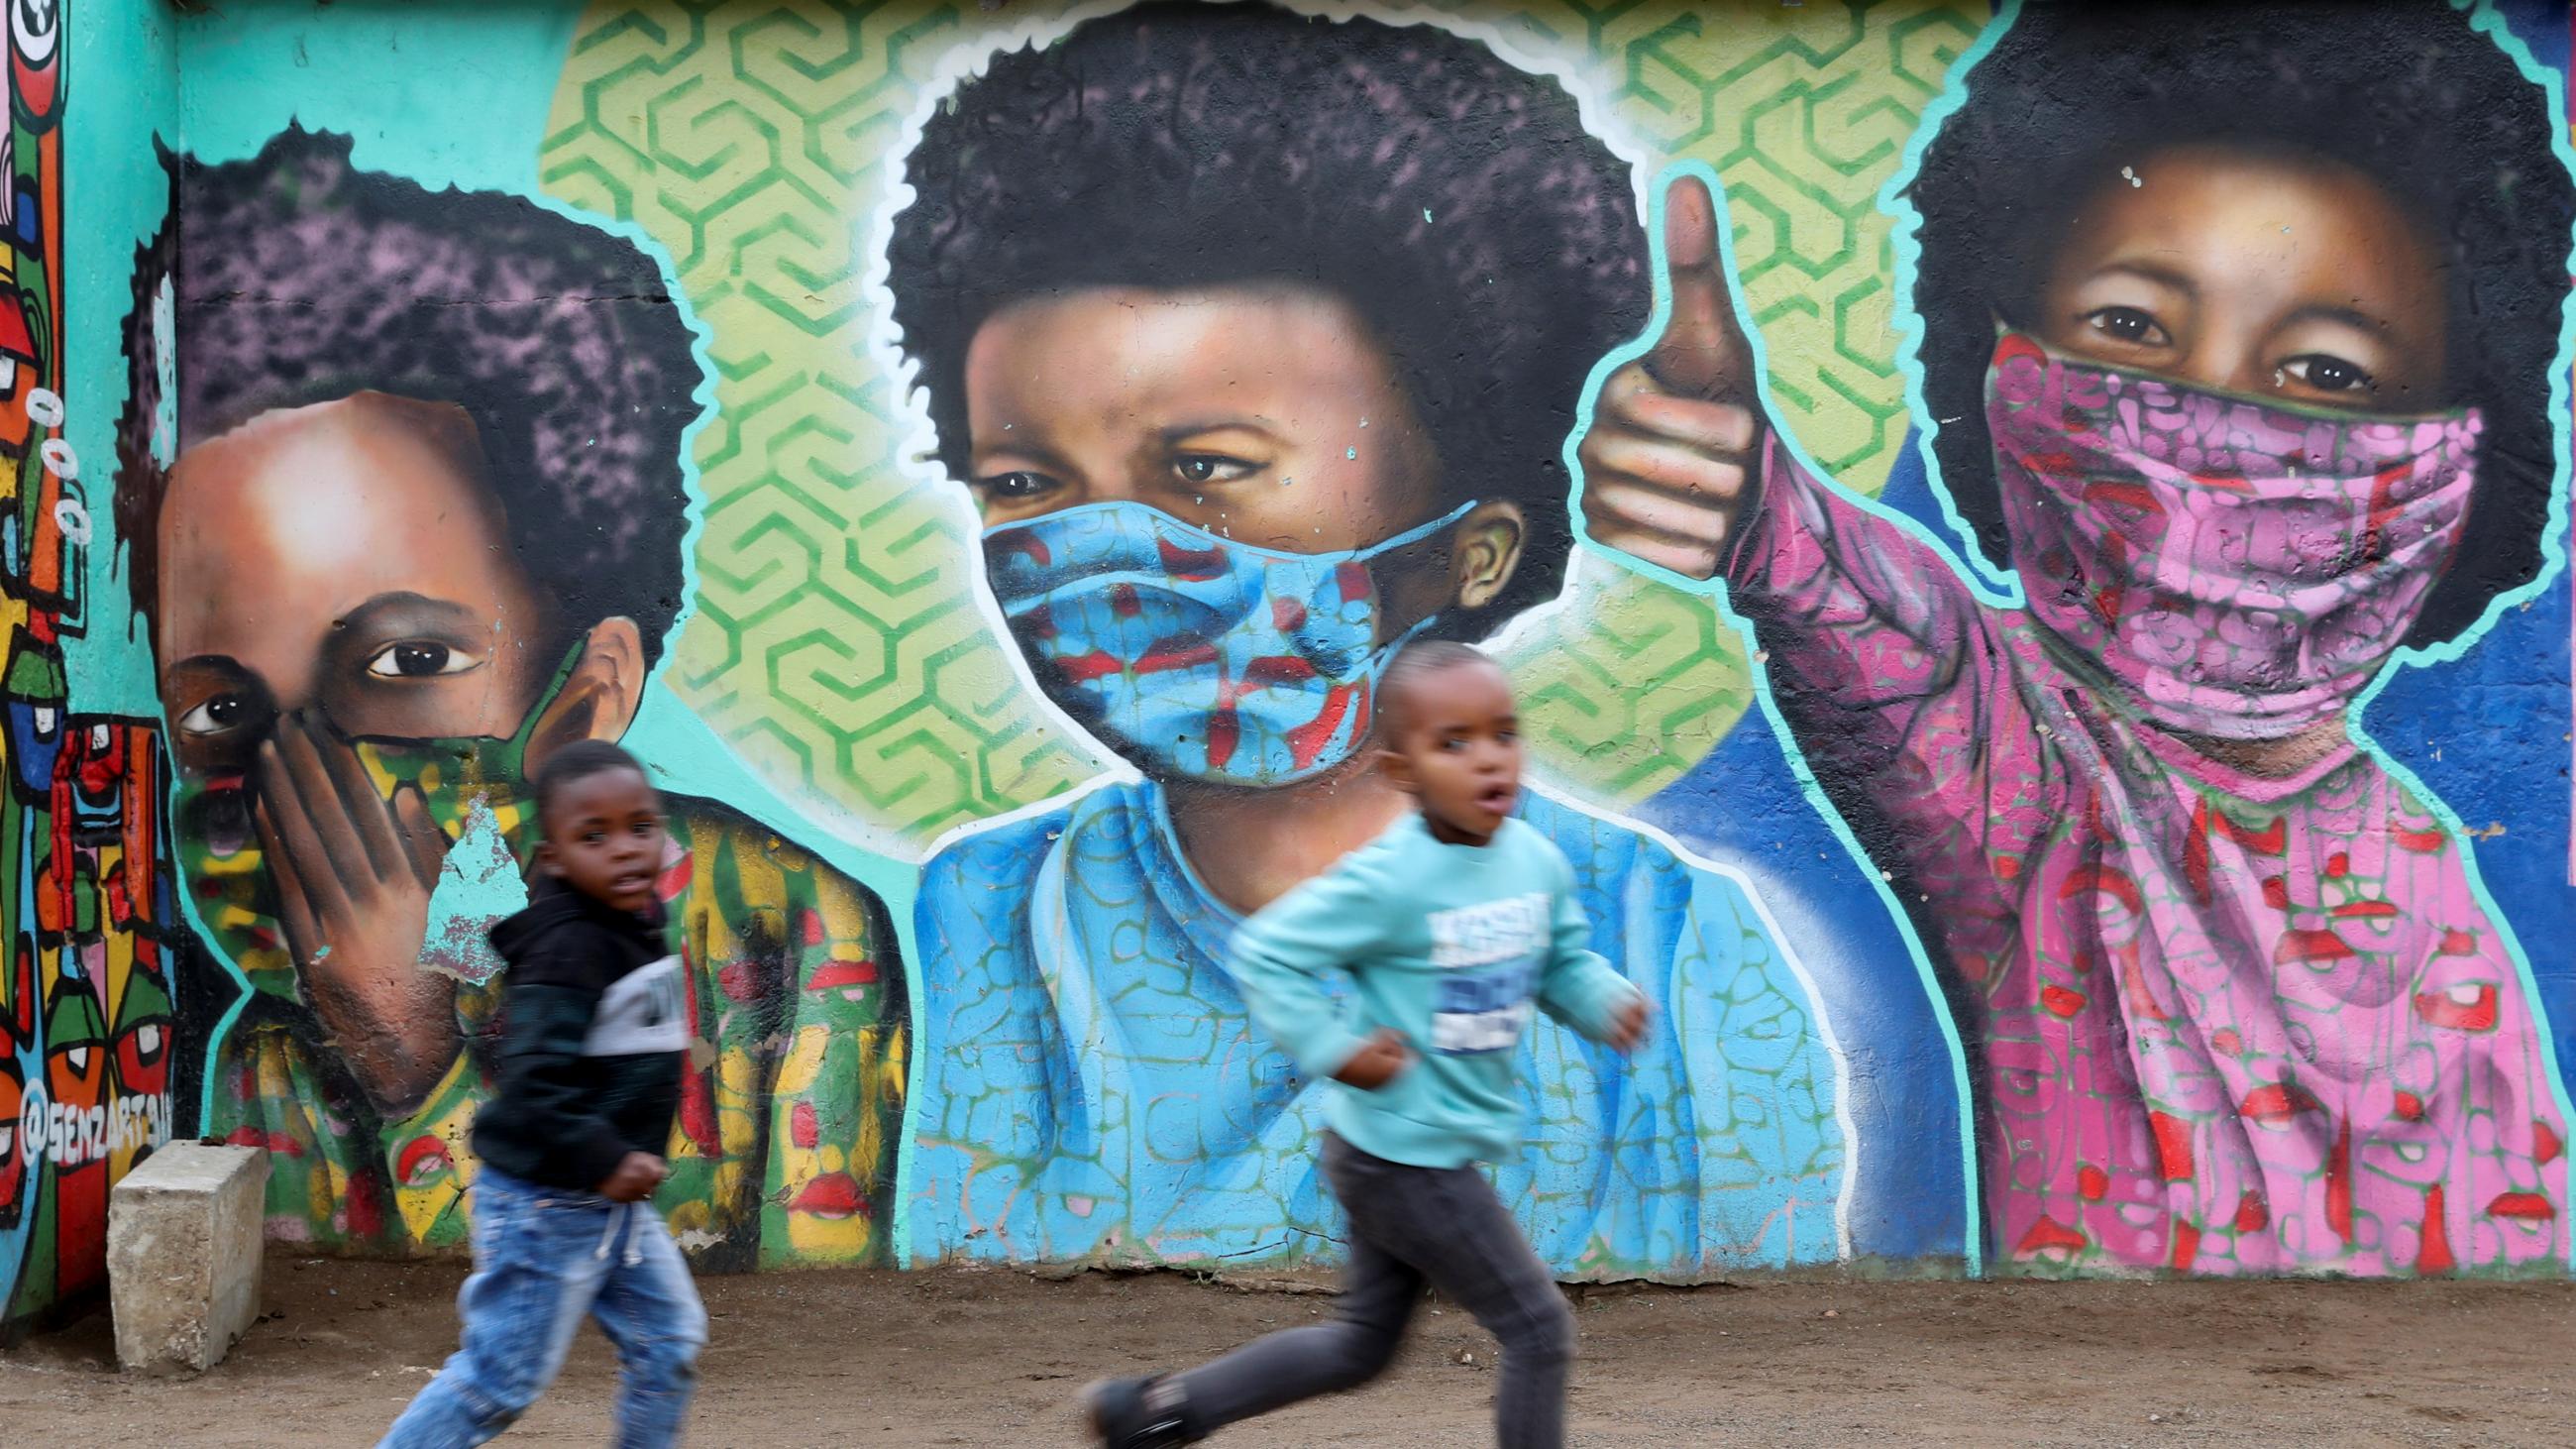 Boys run past a mural by graffiti artist Senzart911 during the COVID outbreak, in Kliptown, the oldest residential district of Soweto, South Africa, on October 27, 2021.